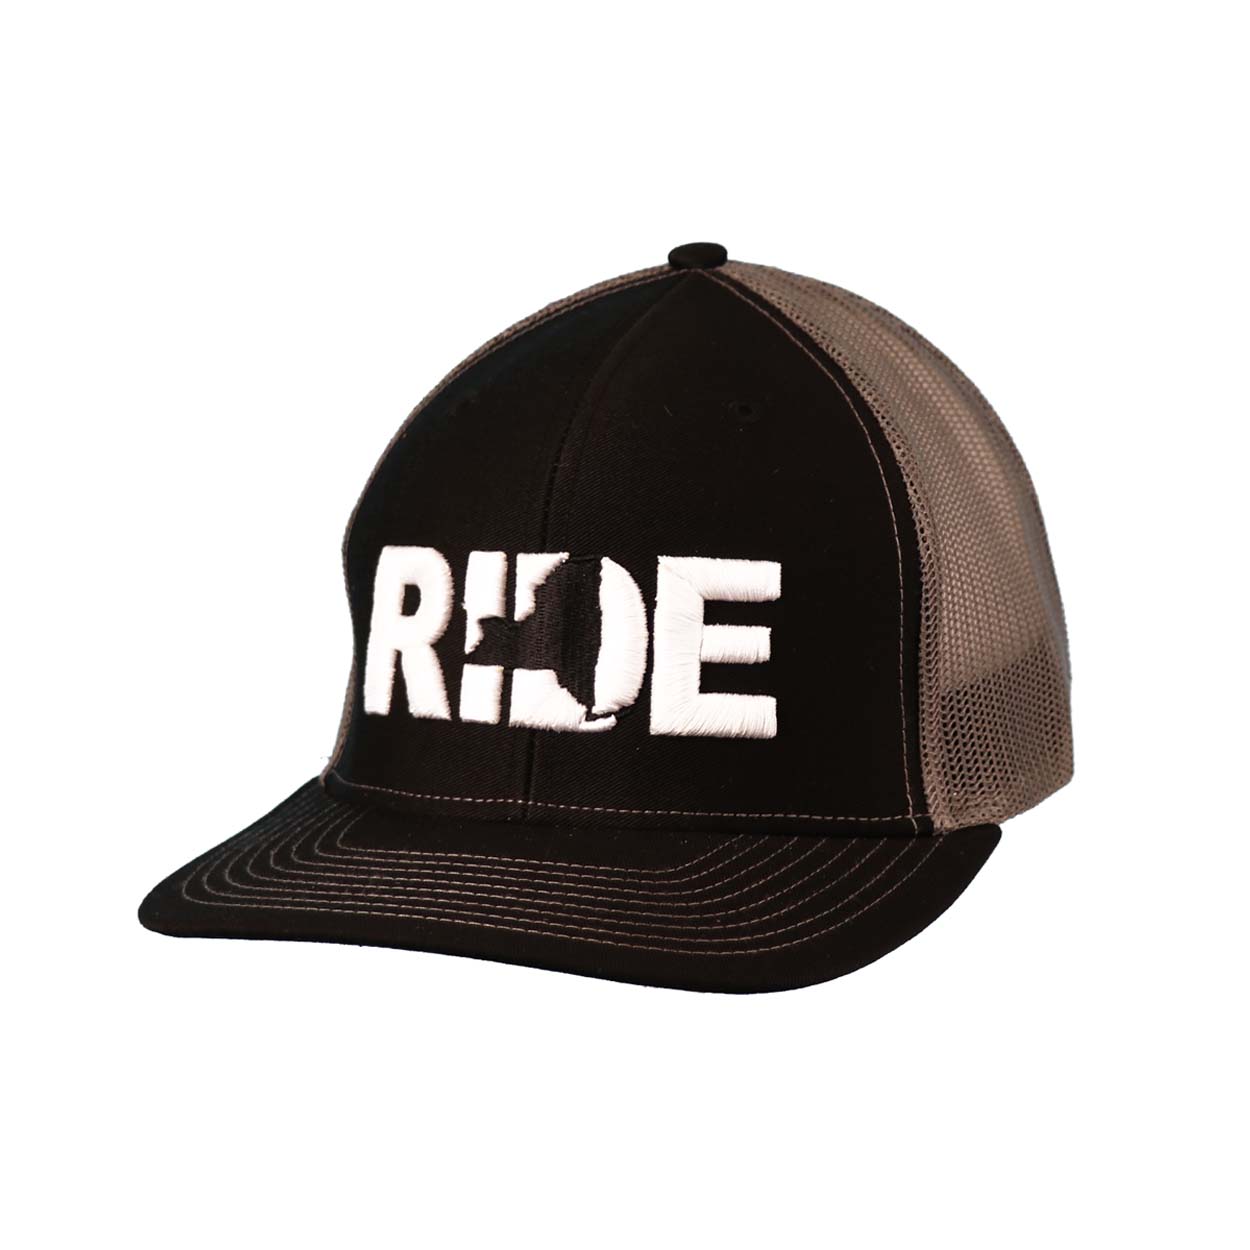 Ride New York Classic Embroidered Snapback Trucker Hat Black/Gray